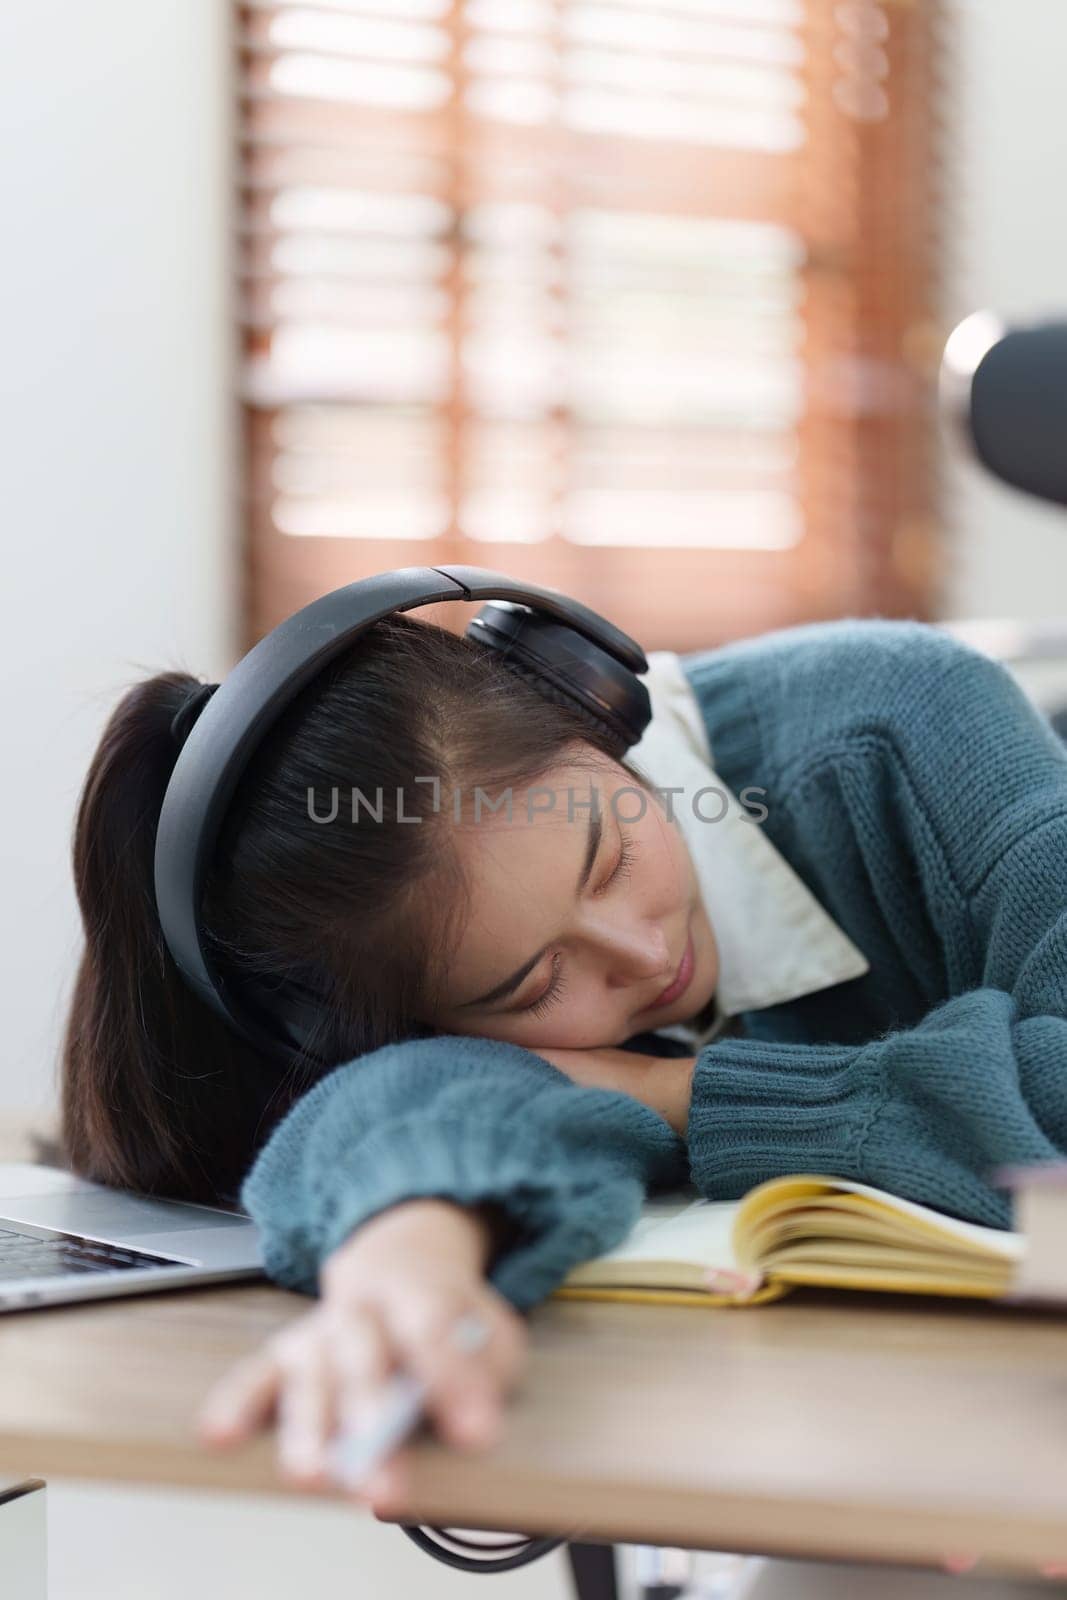 Online education, e-learning. Asian woman relaxing after studying using a laptop, listening to online lecture, taking notes, online study at home.